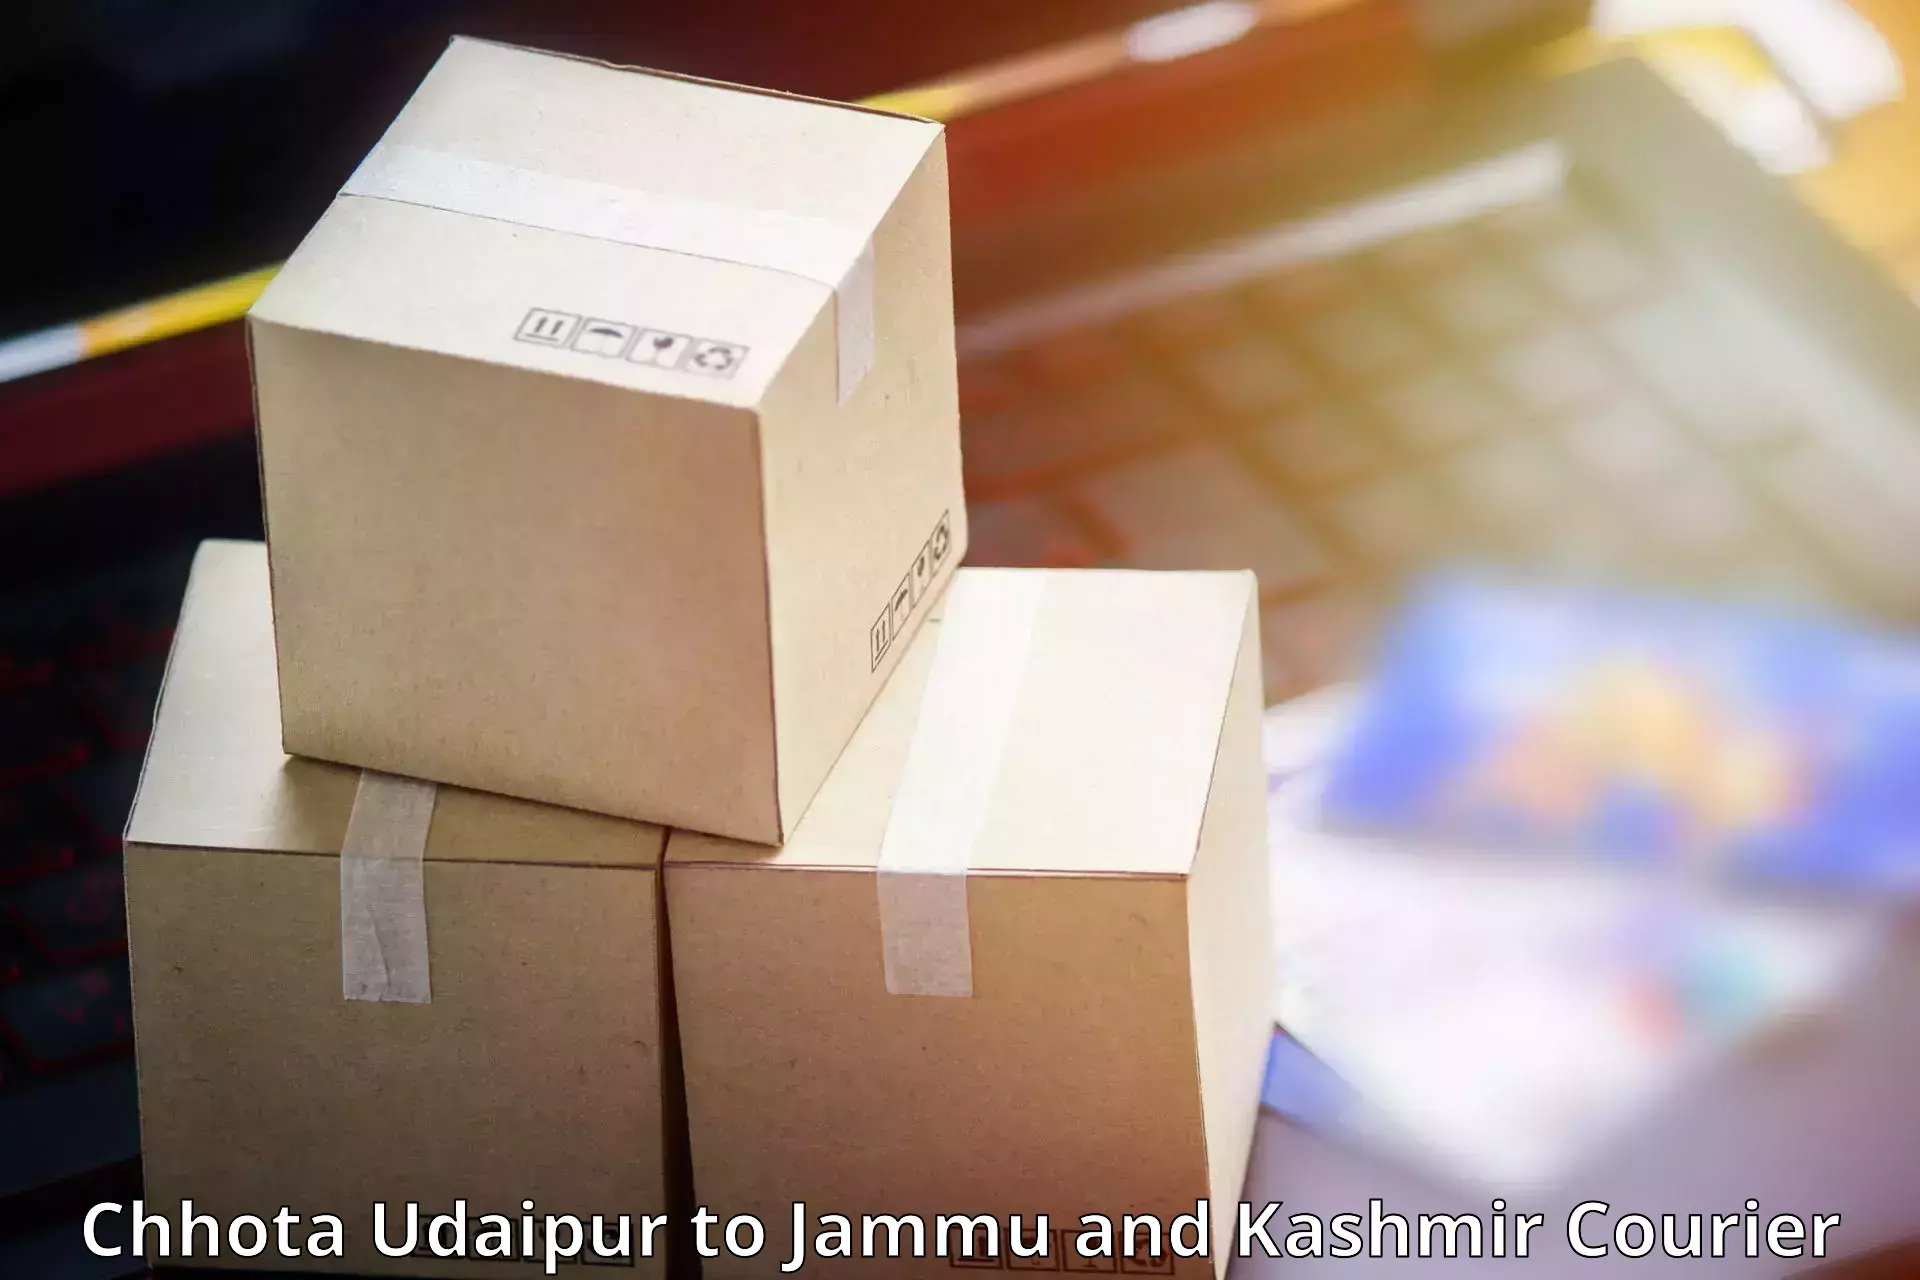 Express package services Chhota Udaipur to Jammu